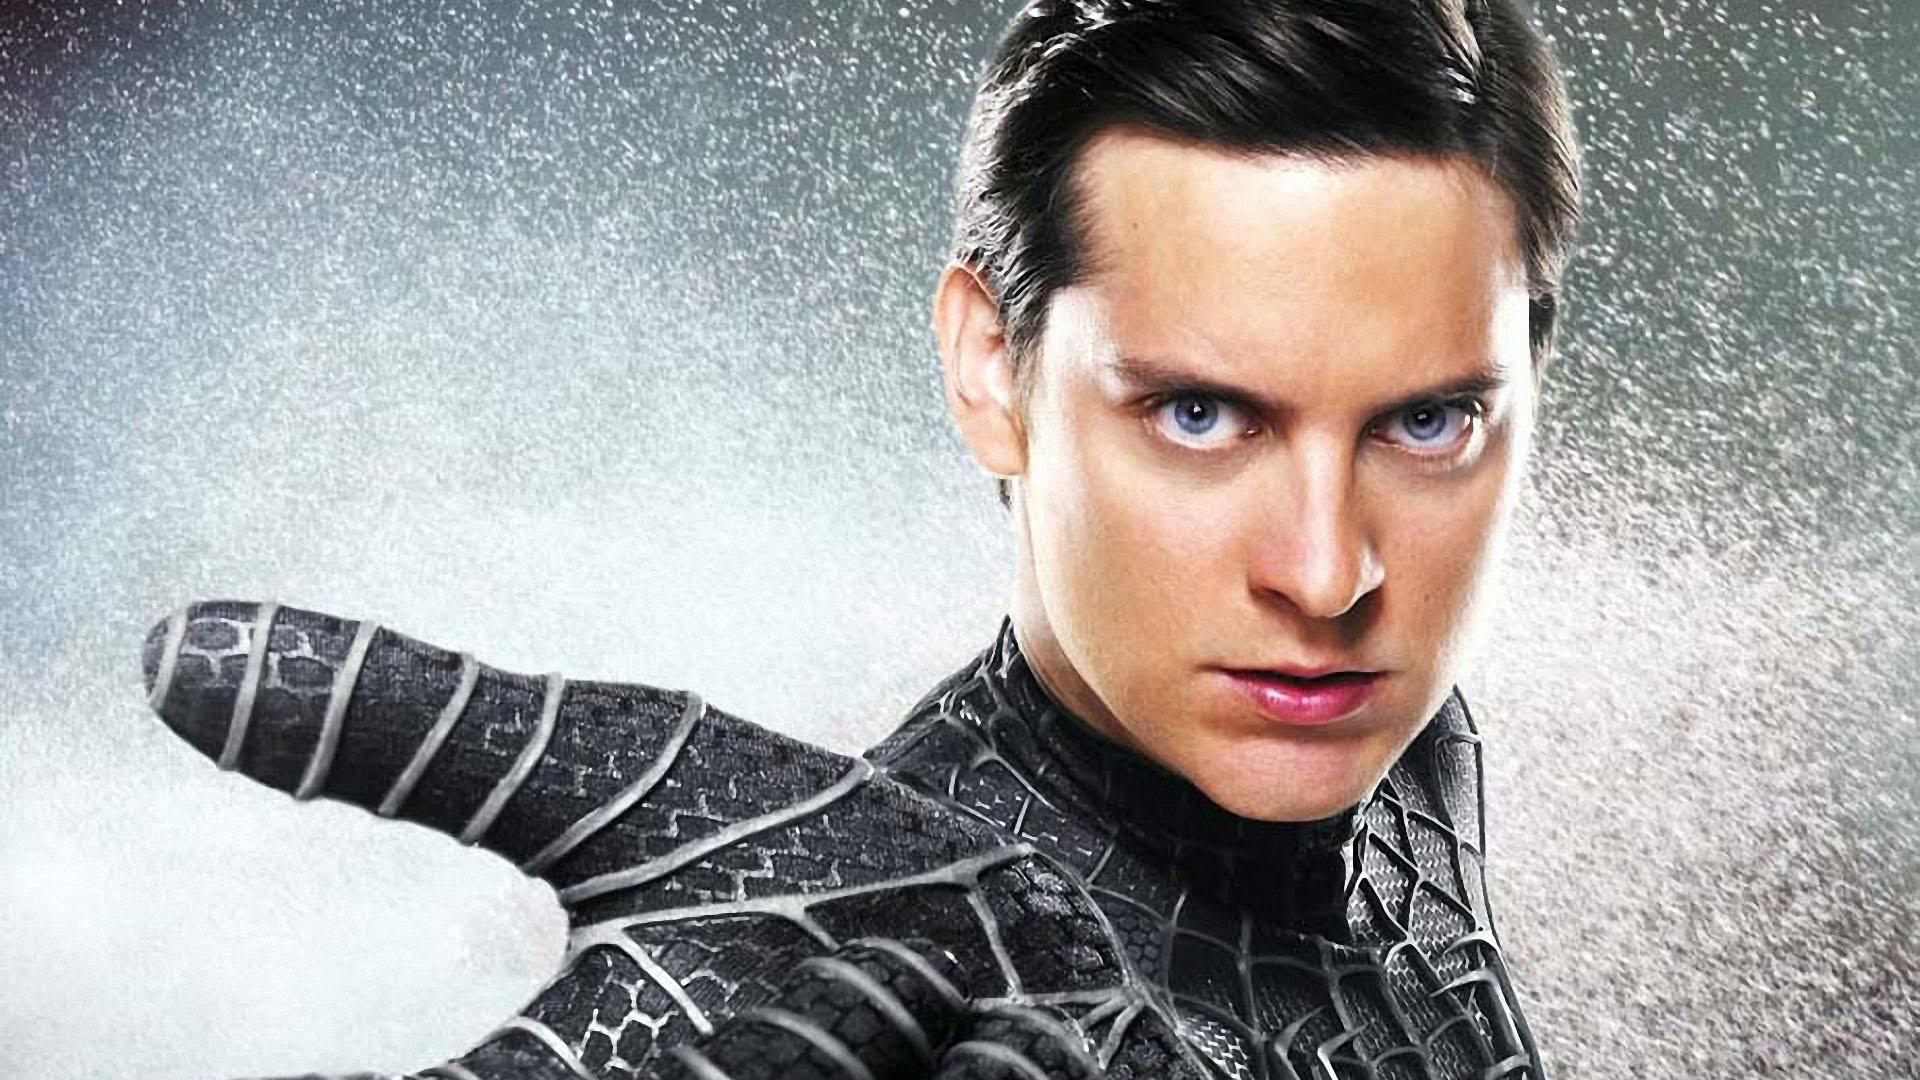 Tobey Maguire Wallpaper HD HDcoolwallpaper